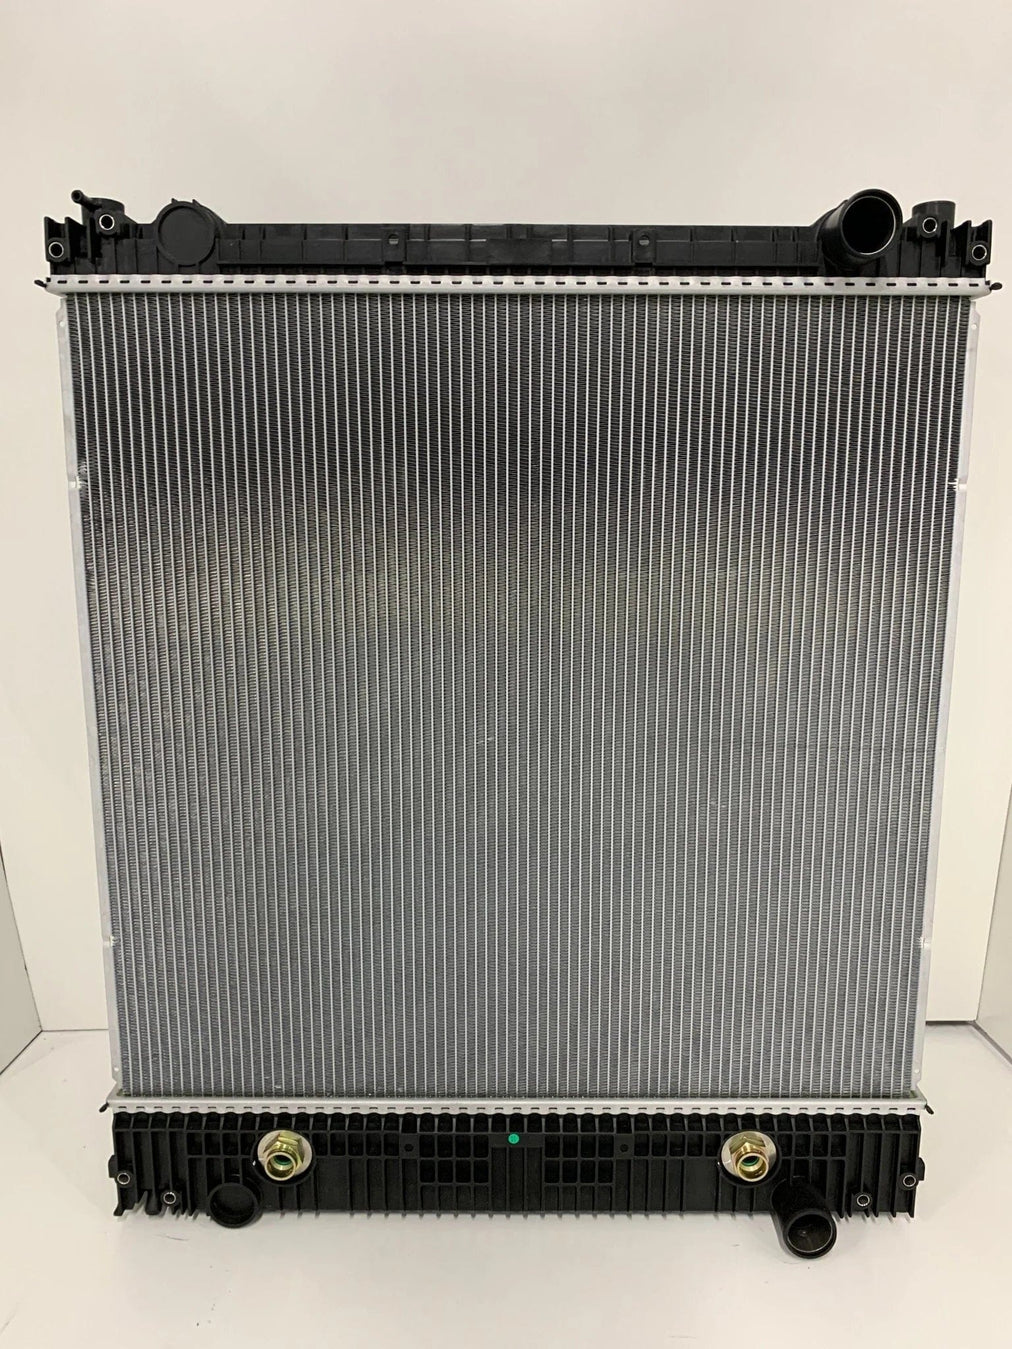 SCSI238615 | Genuine Freightliner® Radiator (Assembly) (for: Freightliner) (Weight: 60 lbs)